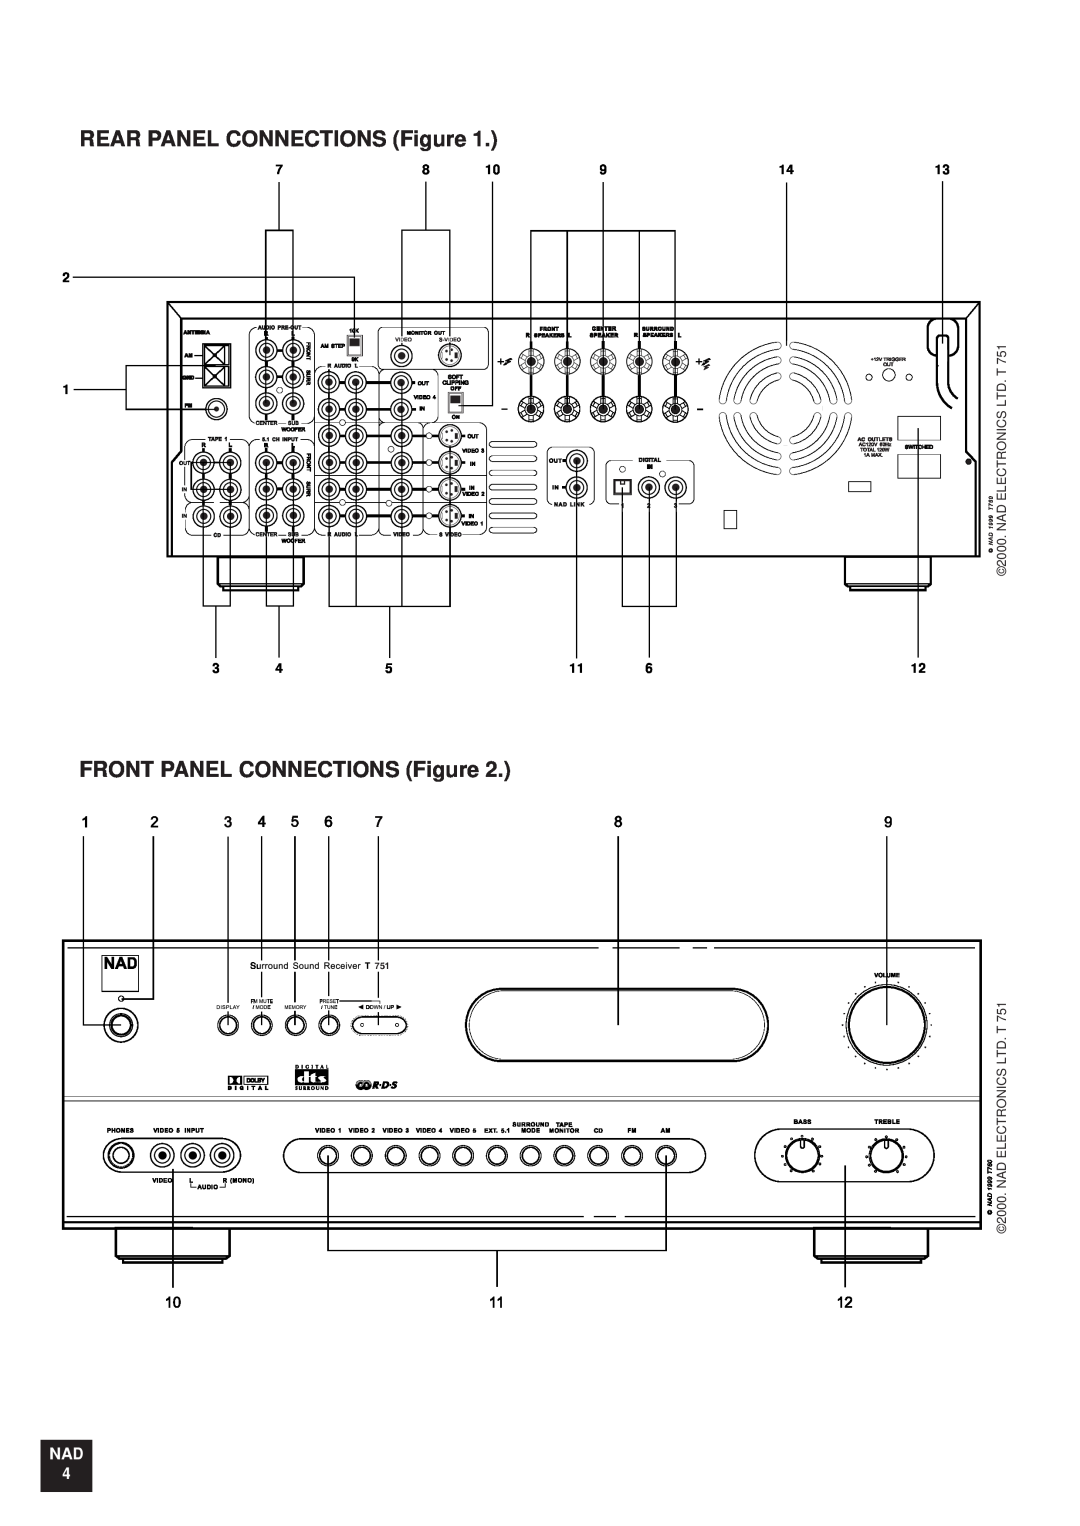 NAD T 751751 owner manual REAR PANEL CONNECTIONS Figure, FRONT PANEL CONNECTIONS Figure, Nad 